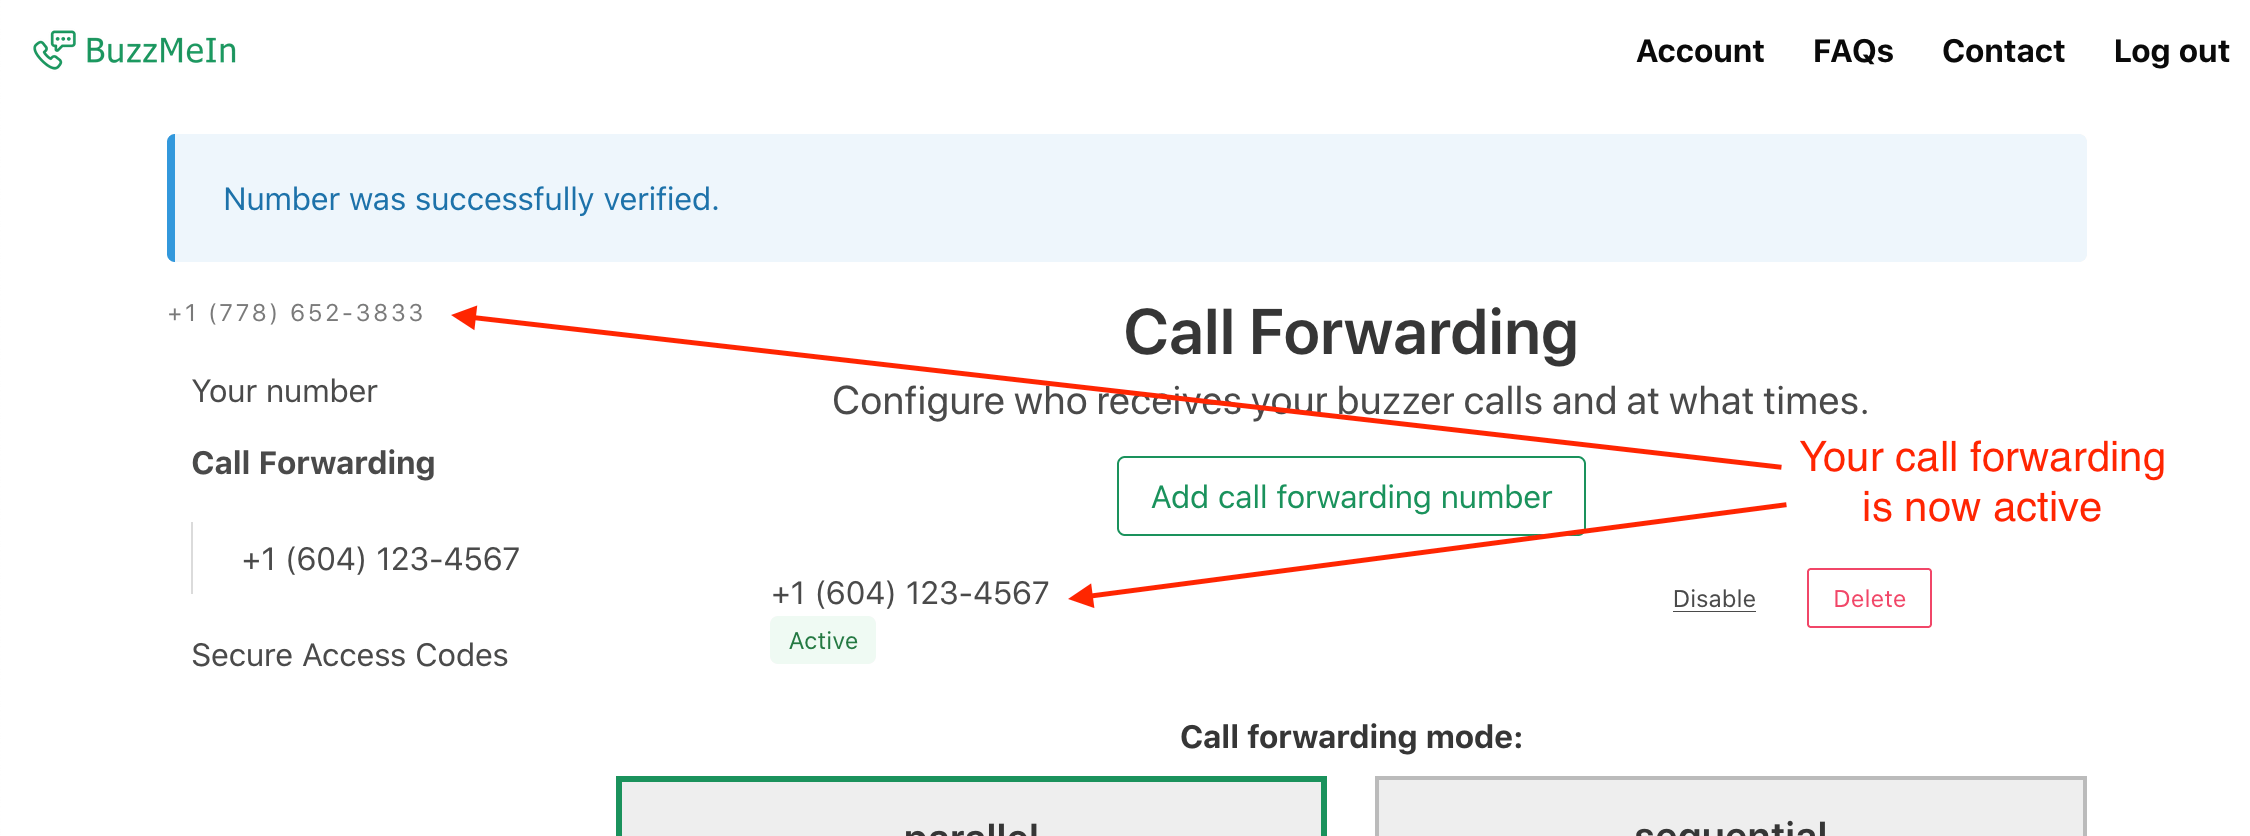 Call forwarding is now active